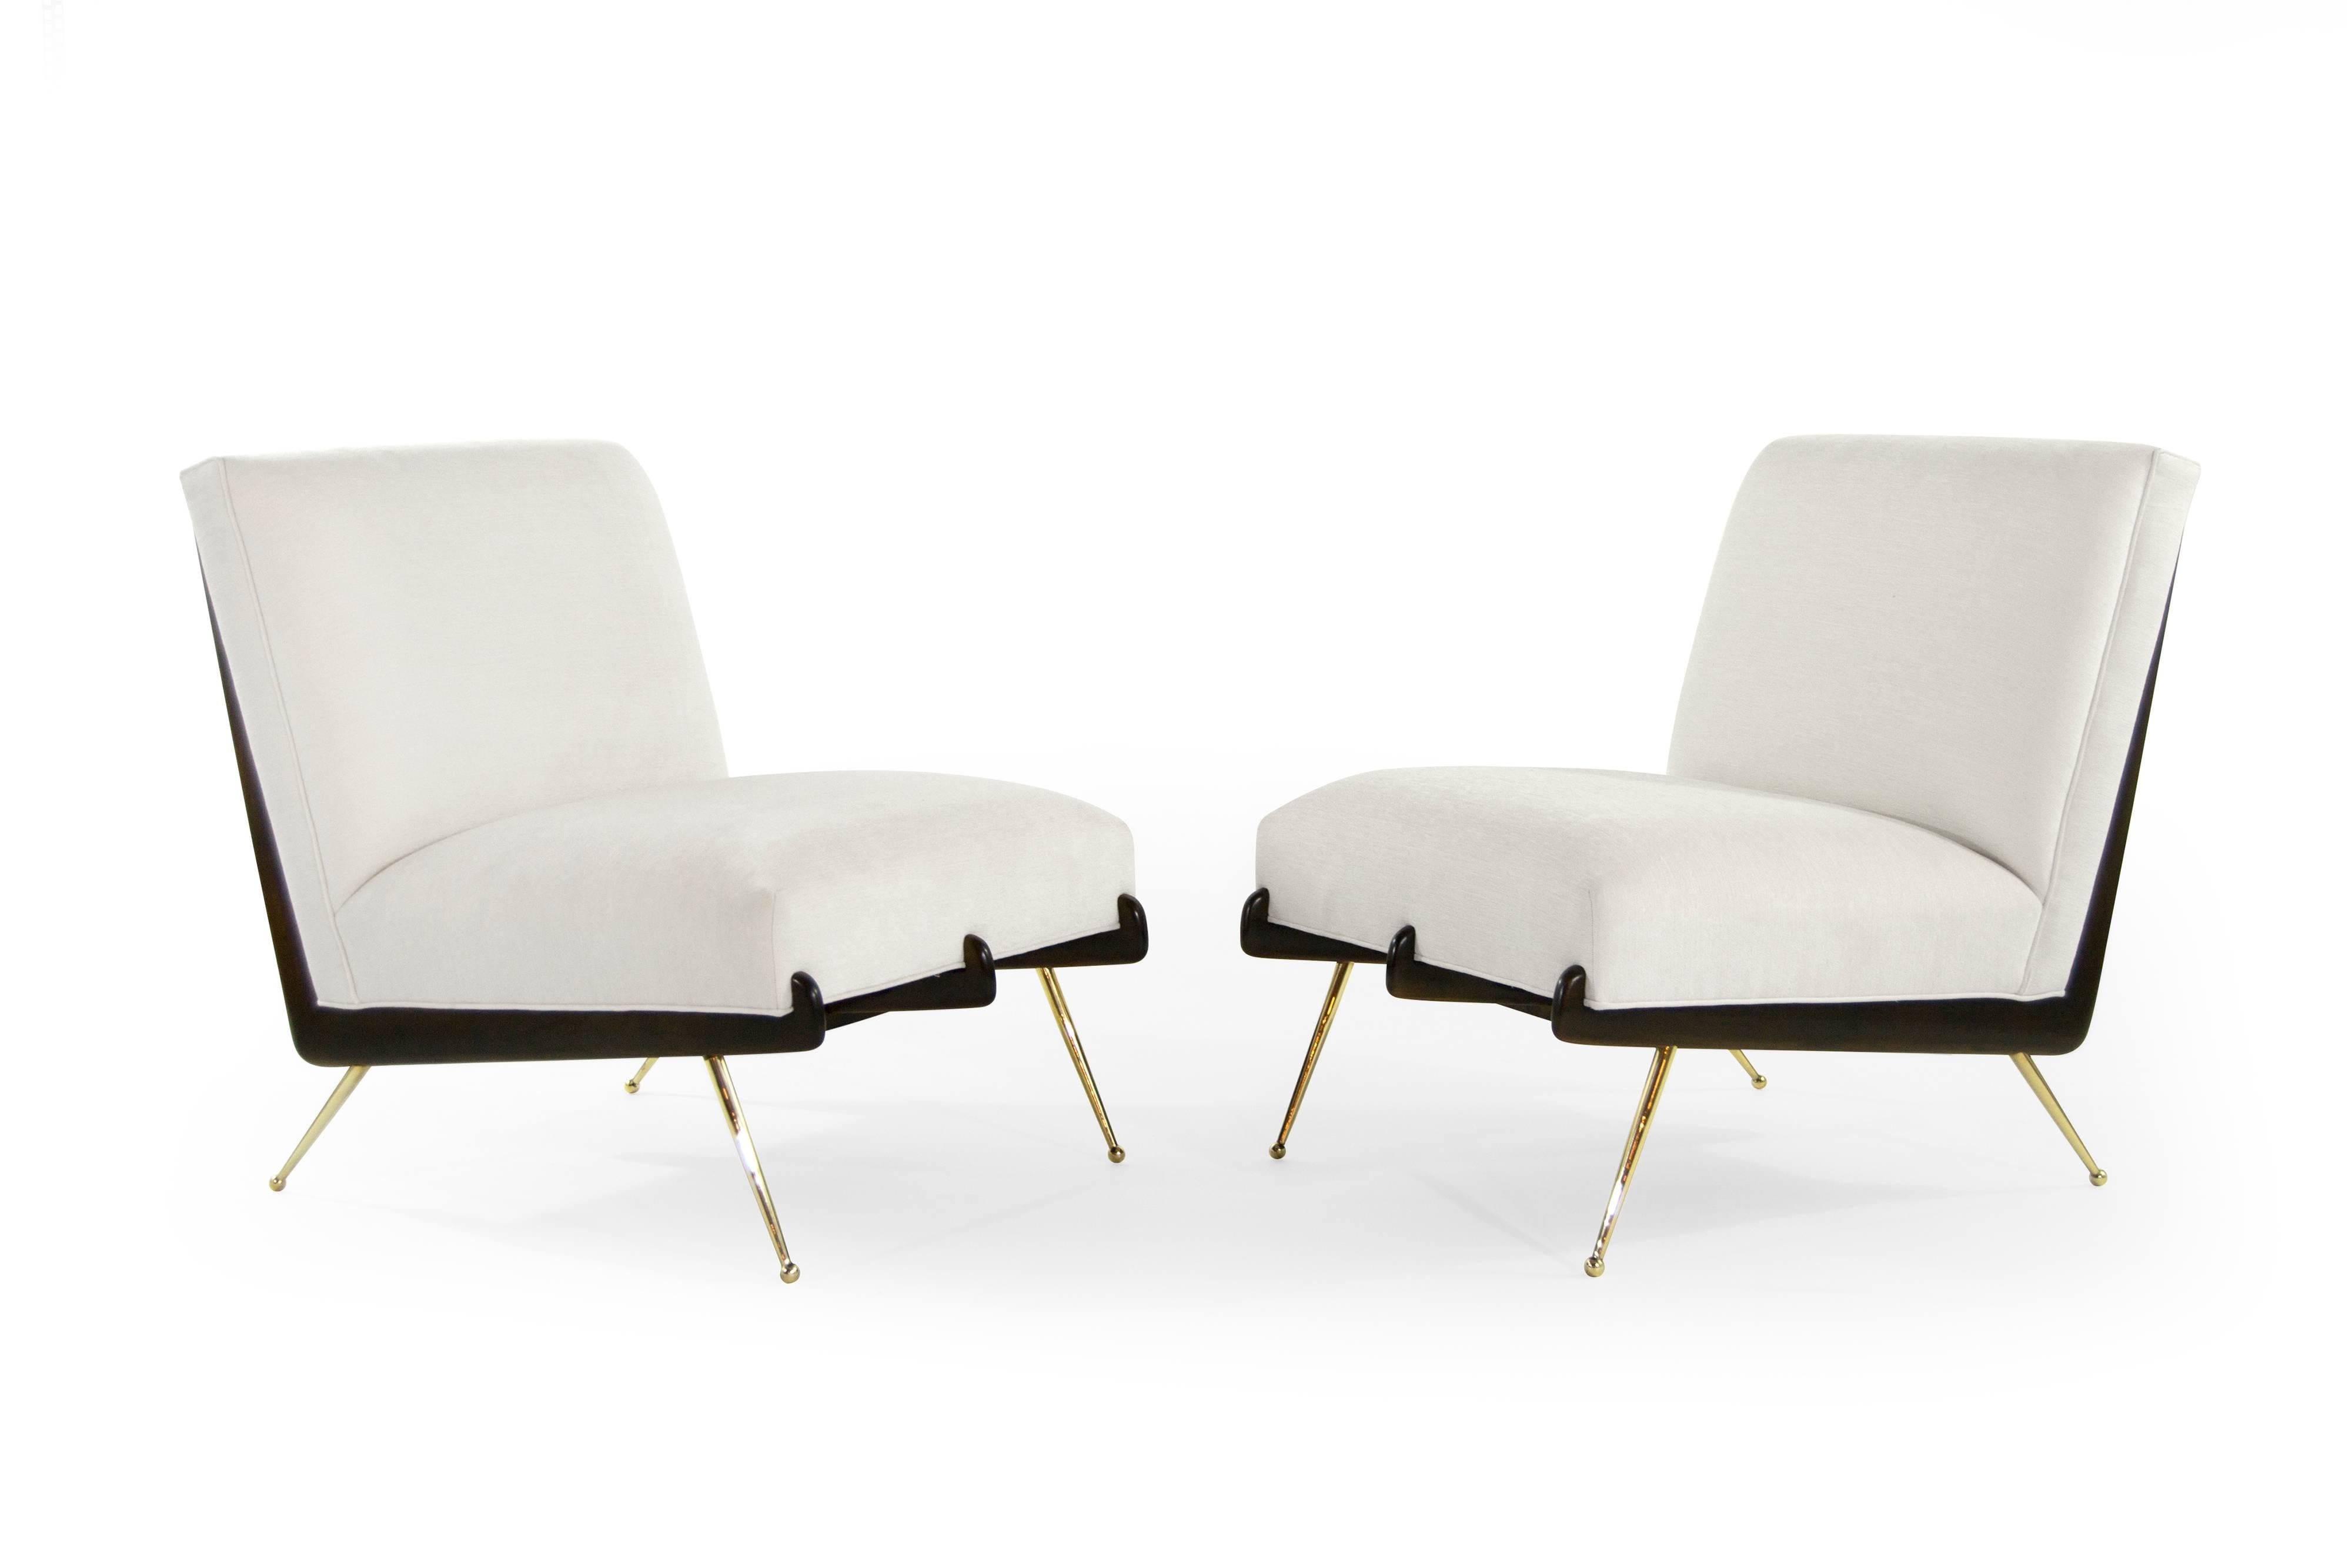 A phenomenal pair of lounge chairs in the style of Italian designer Gio Ponti, circa 1950s.

Boomerang shaped walnut frames fully restored to their original dark finish, newly upholstered in off-white velvet. Thin tapered brass legs newly